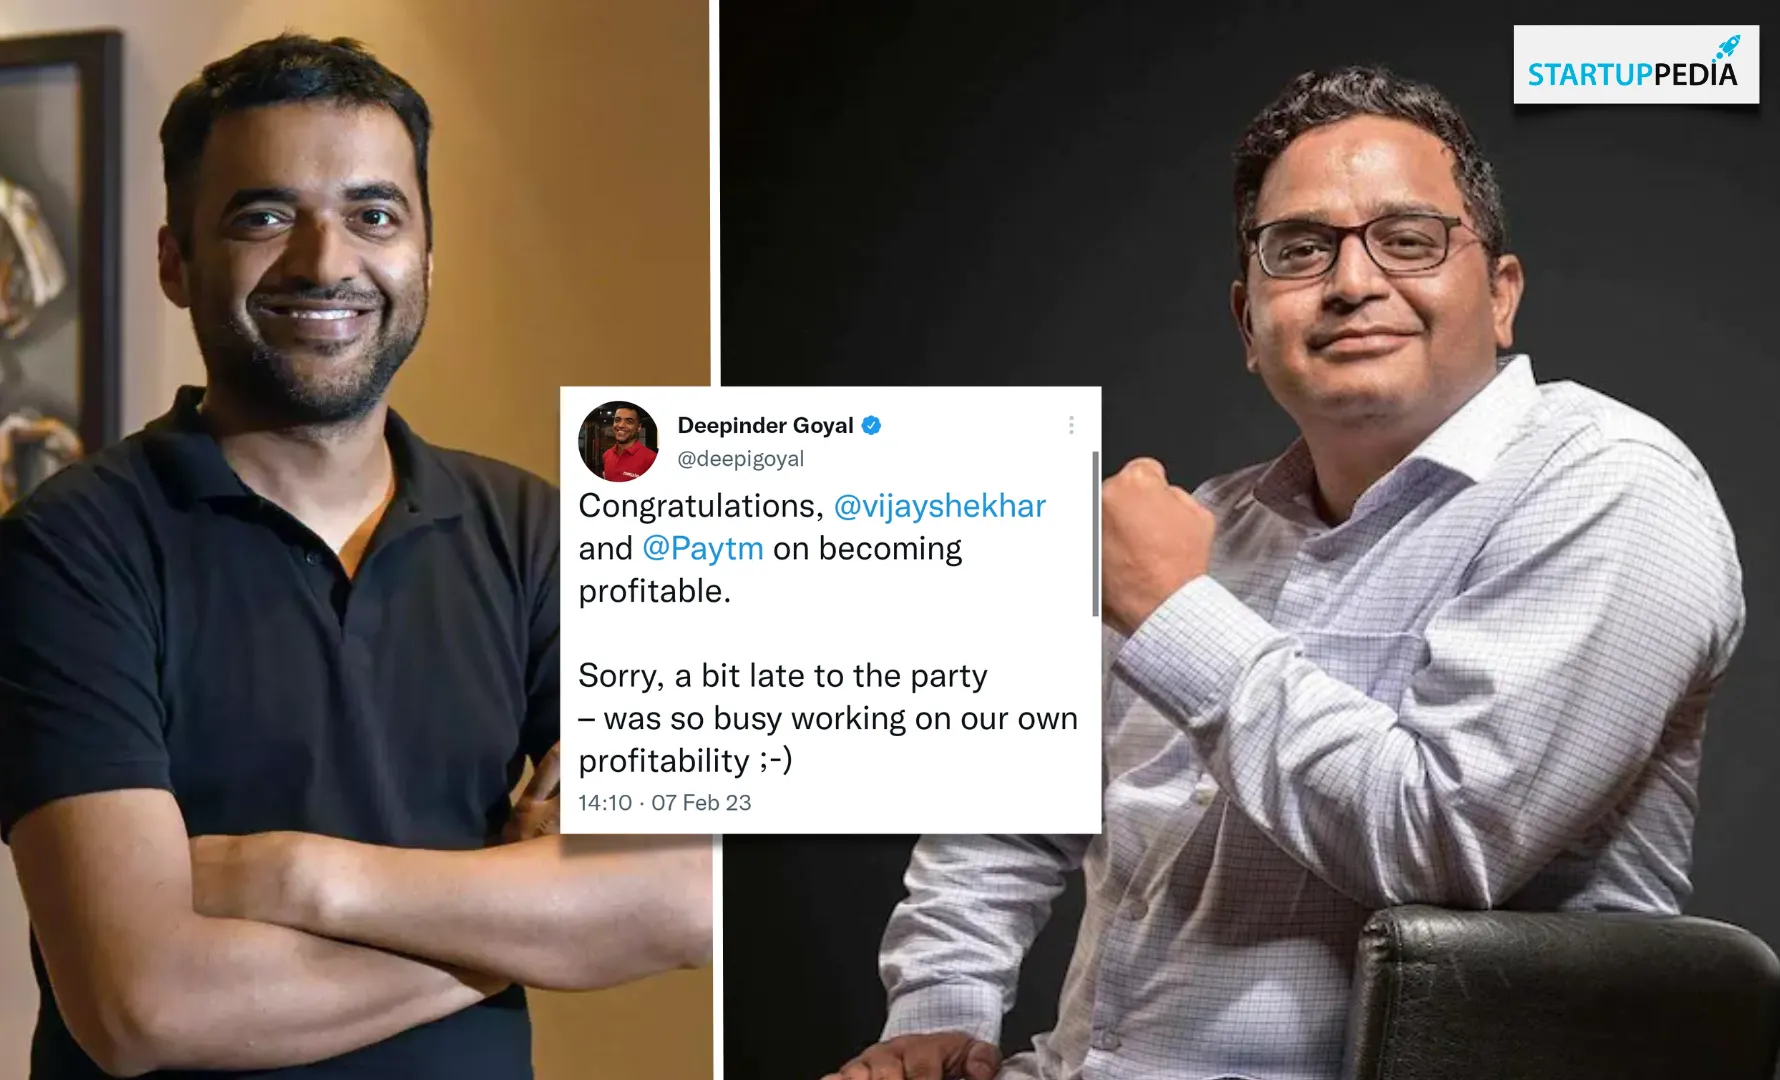 Deepender Goyal congrats Vijay Shekhar Sharma and Paytm on becoming profitable, and adds “Sorry, a bit late to the party – was busy working on our own profitability”